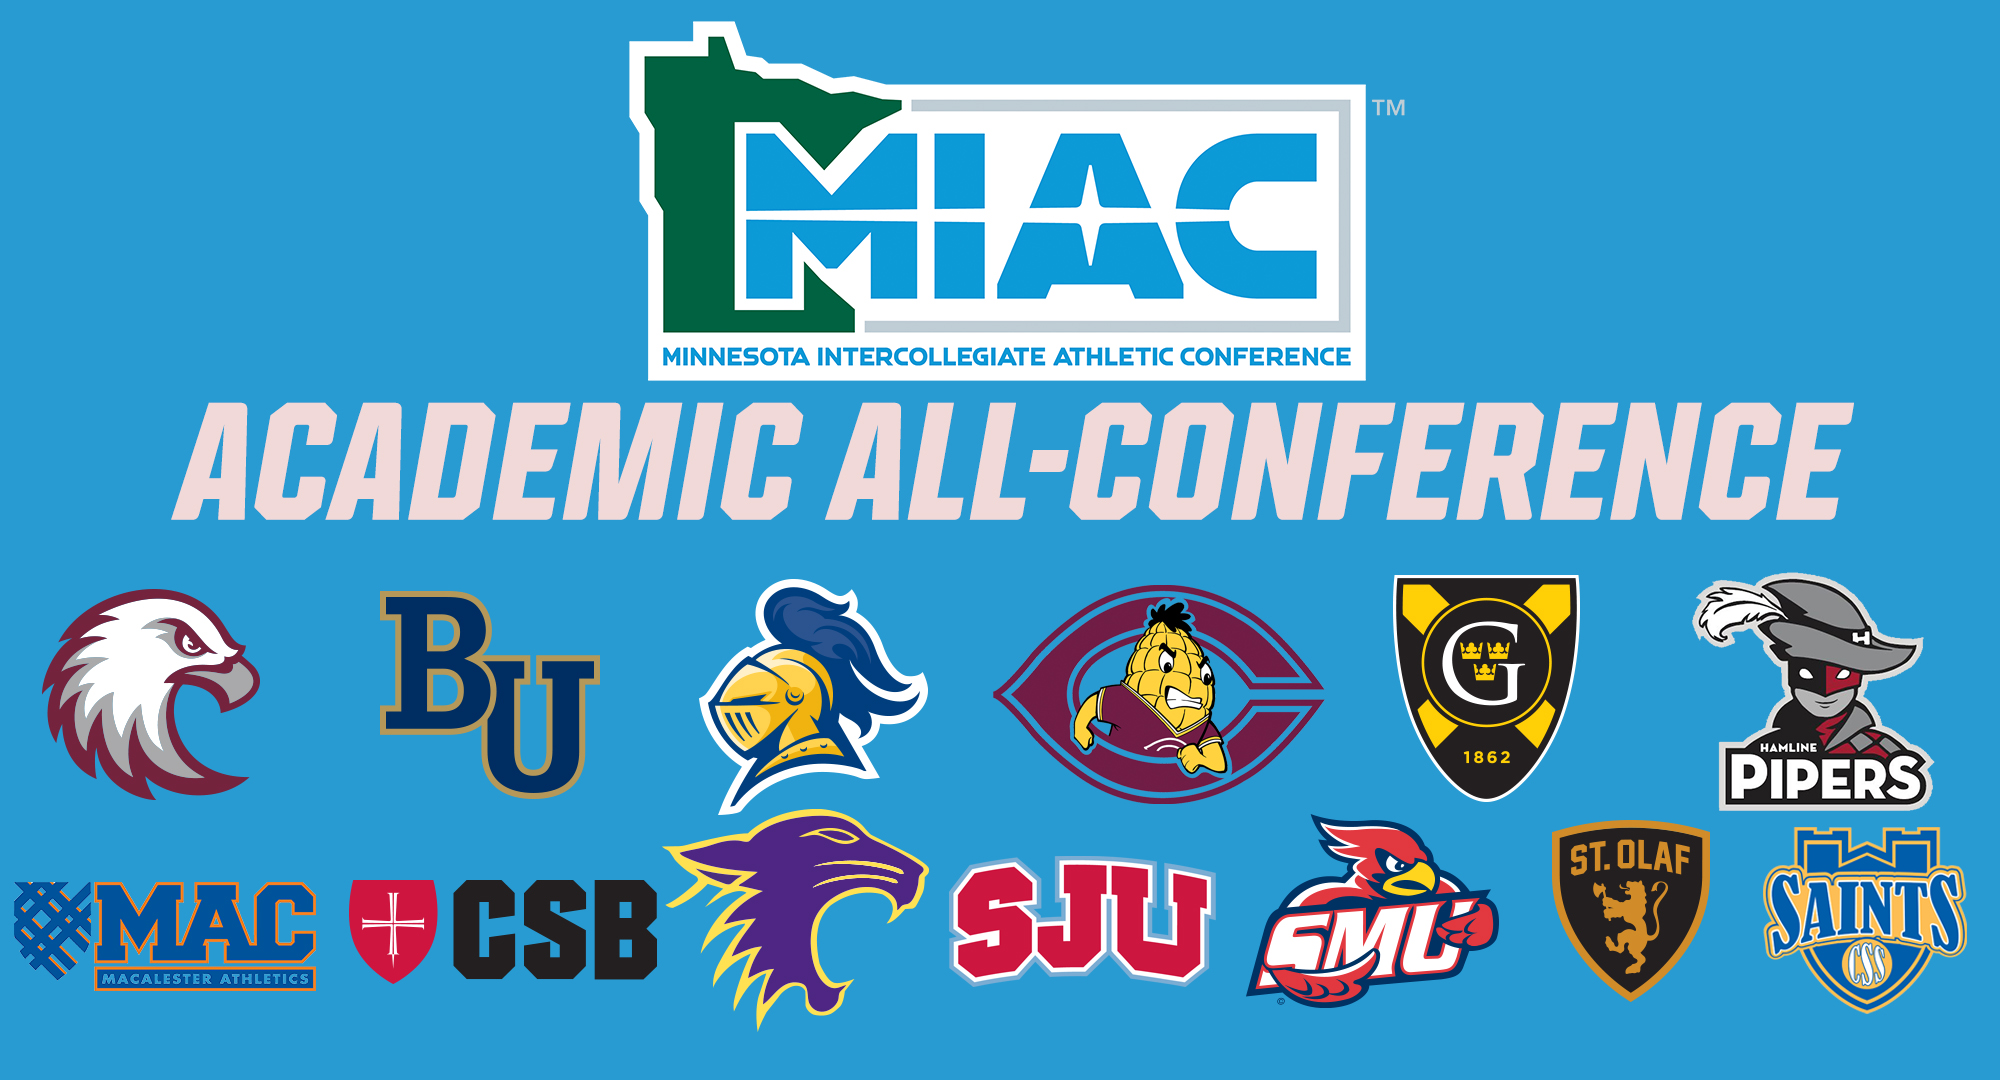 Concordia had a record-setting 46 student-athletes who participated in the fall athletic season earn MIAC Academic All-Conference honors.